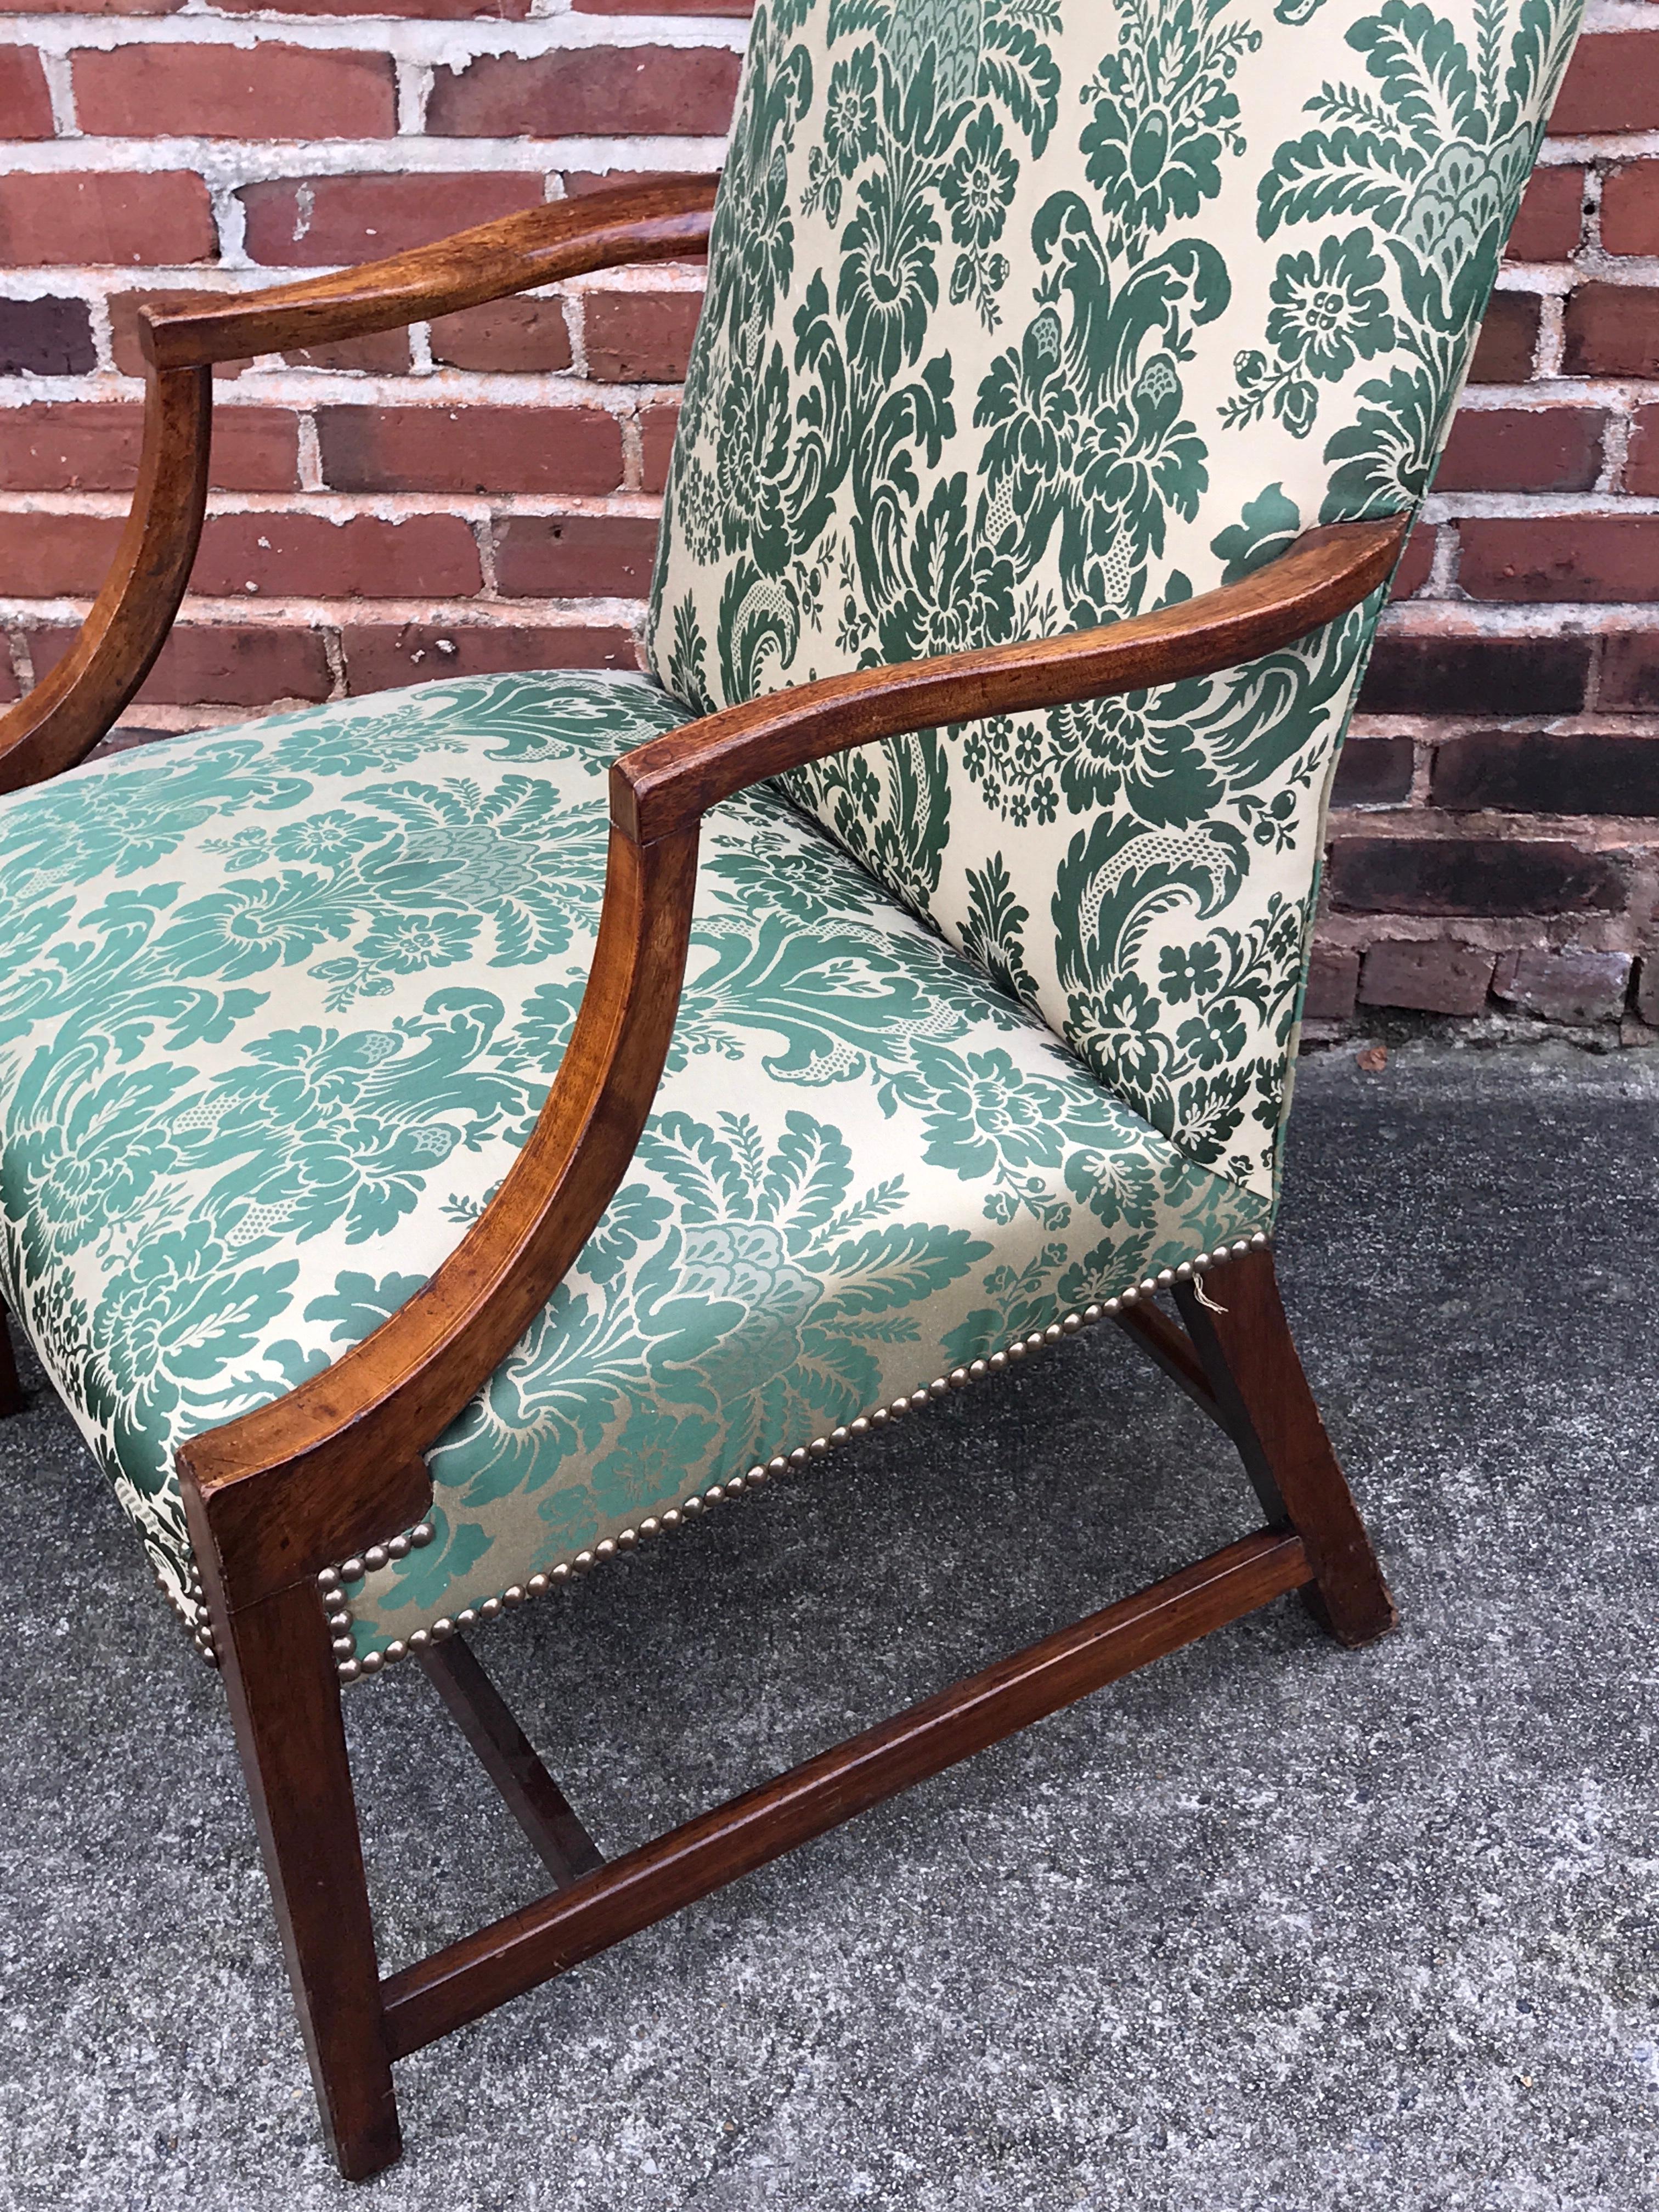 Upholstery American Hepplewhite Lolling Chair, MA or NH